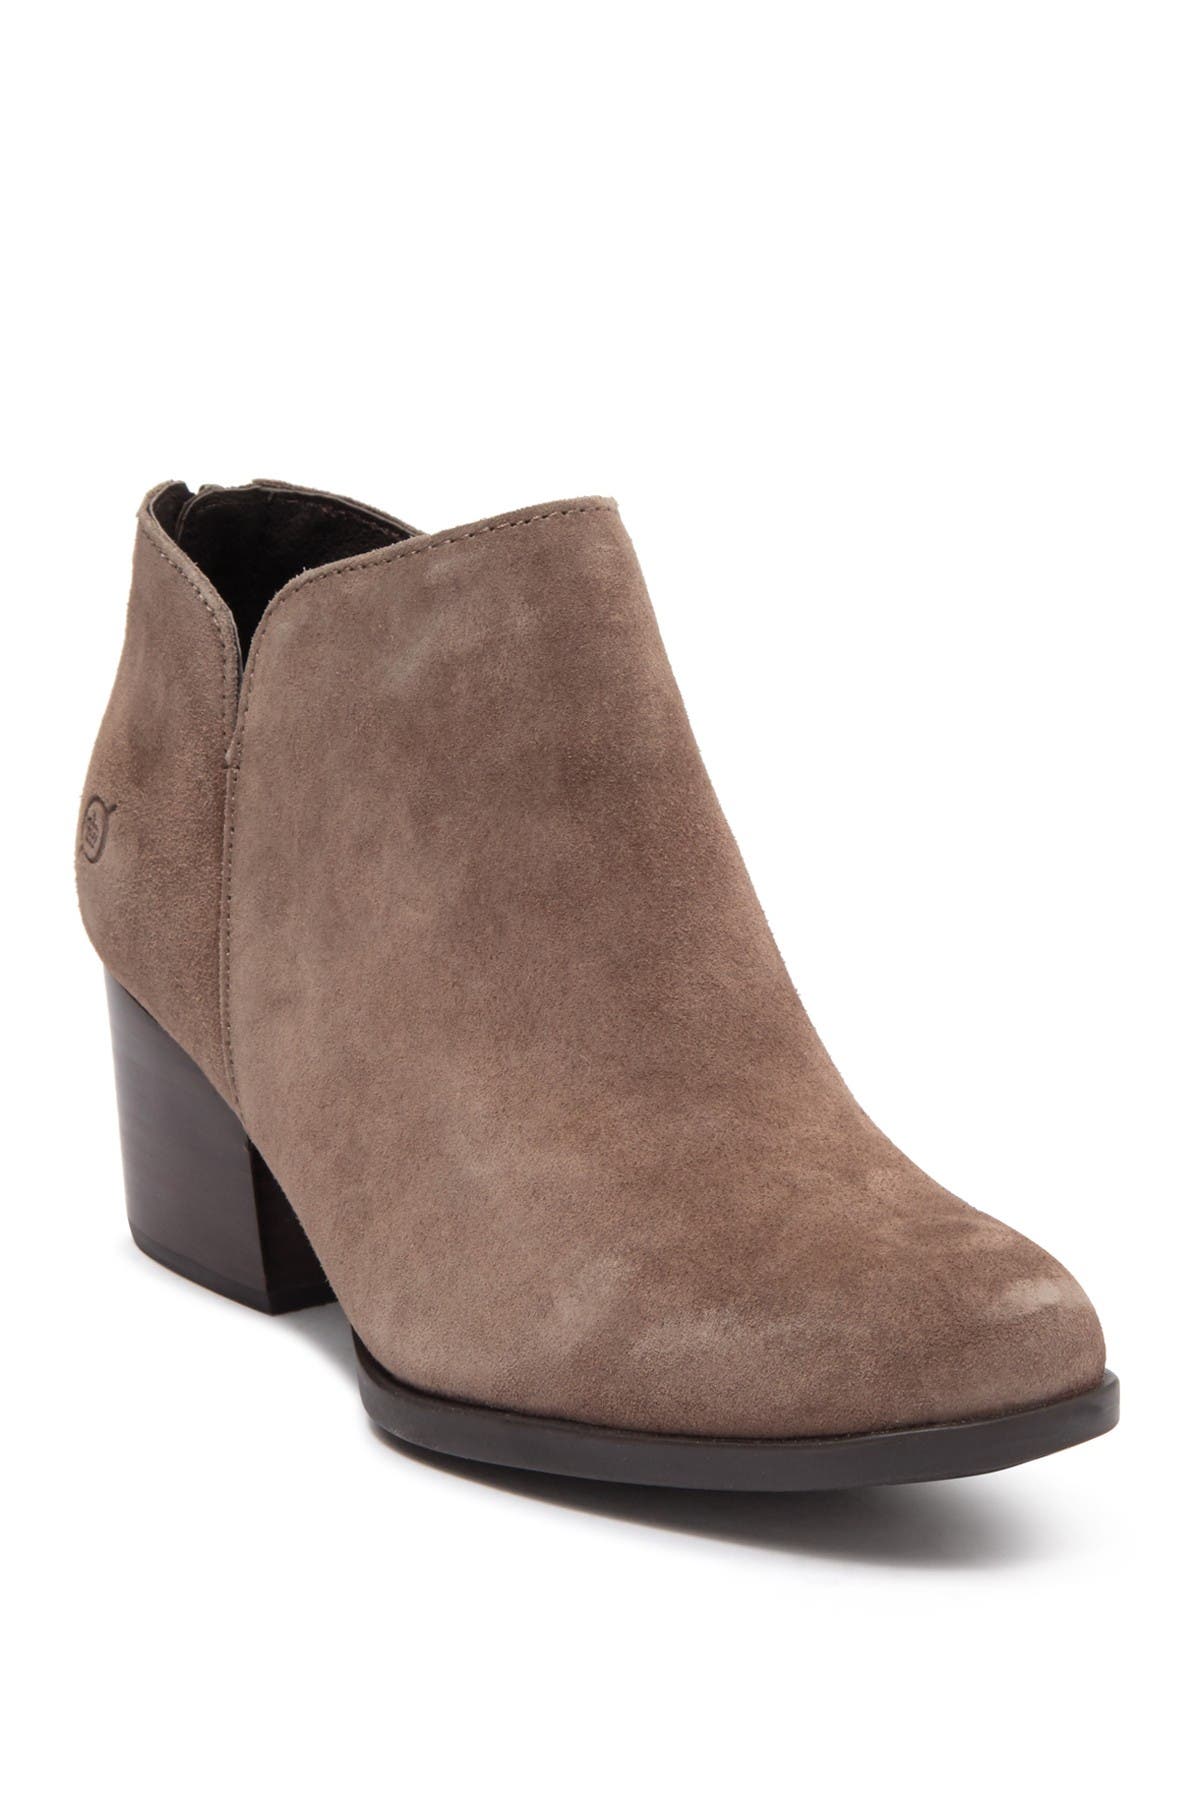 born boots womens clearance